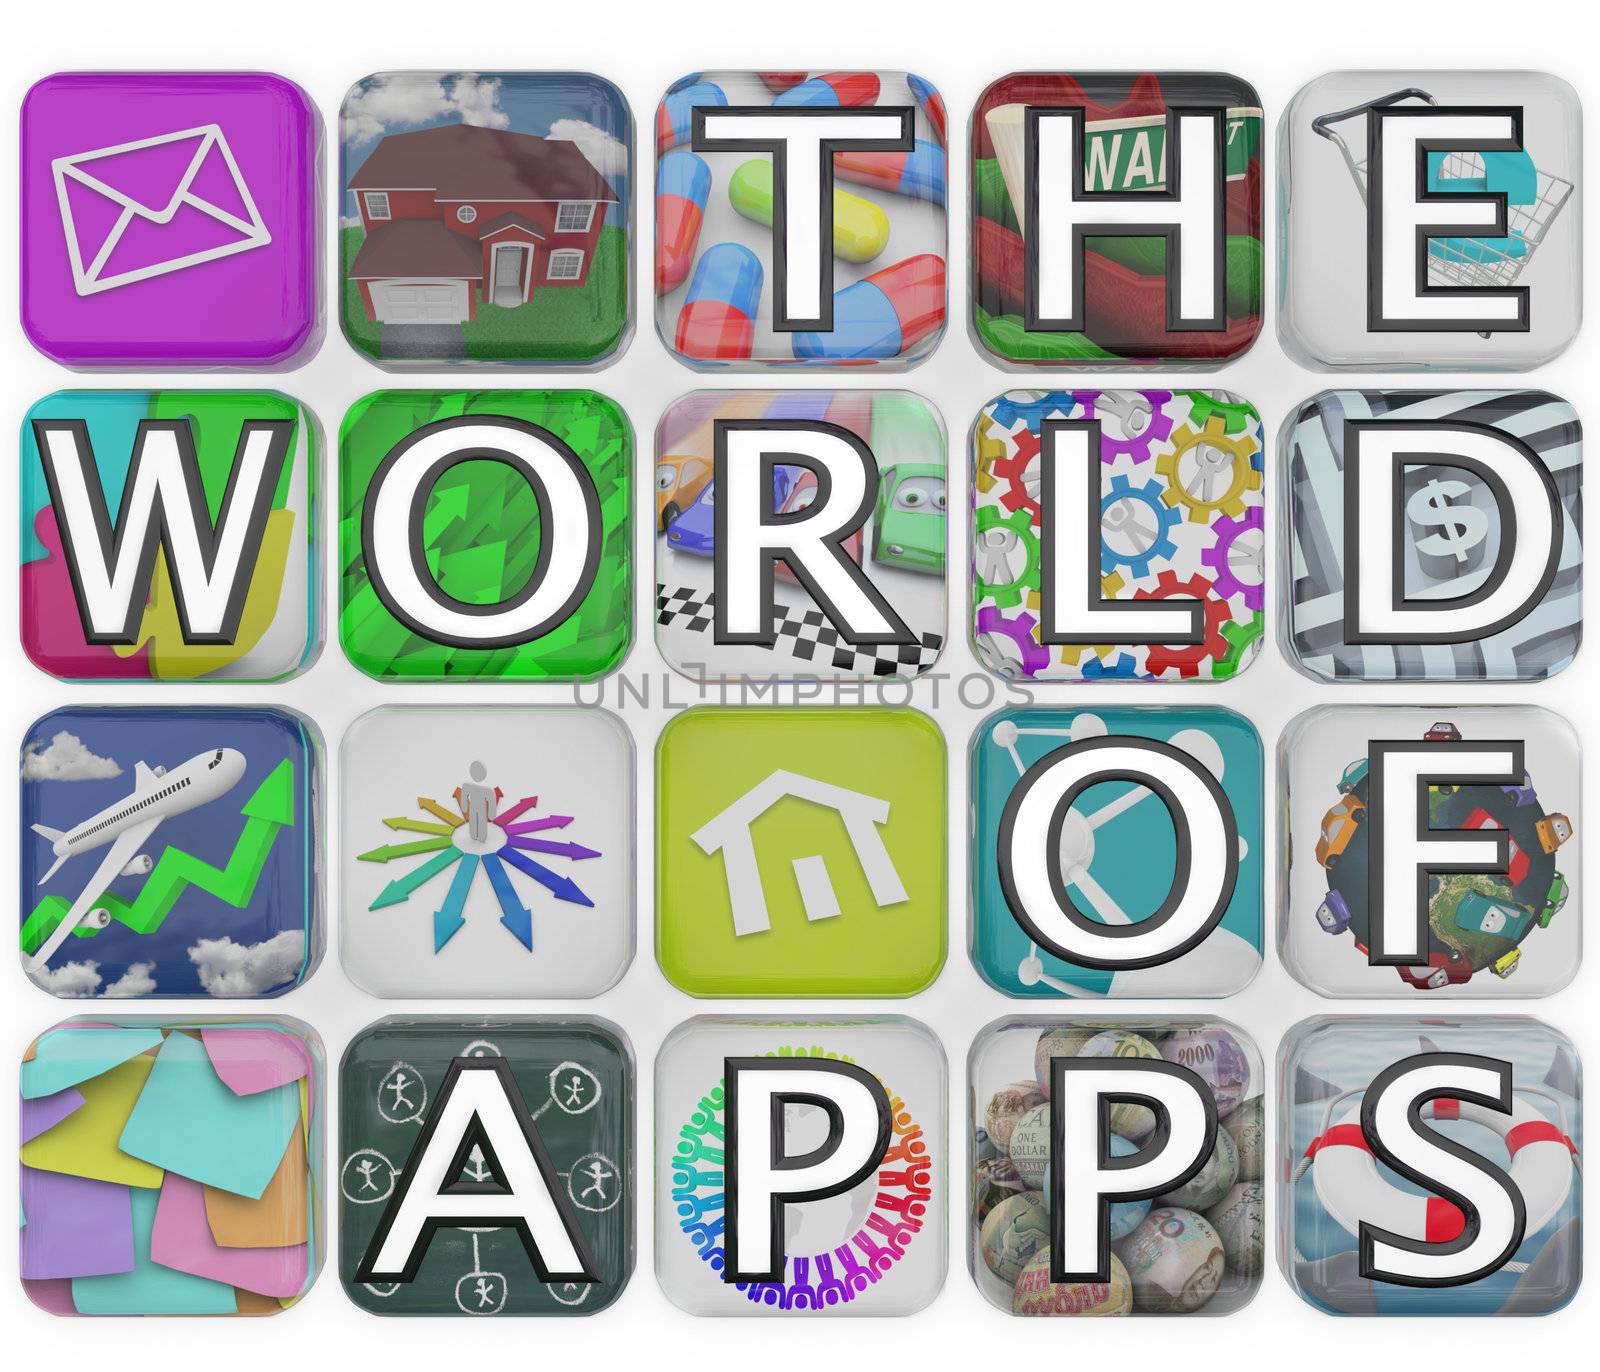 The World of Apps Application Tiles Spell Words by iQoncept